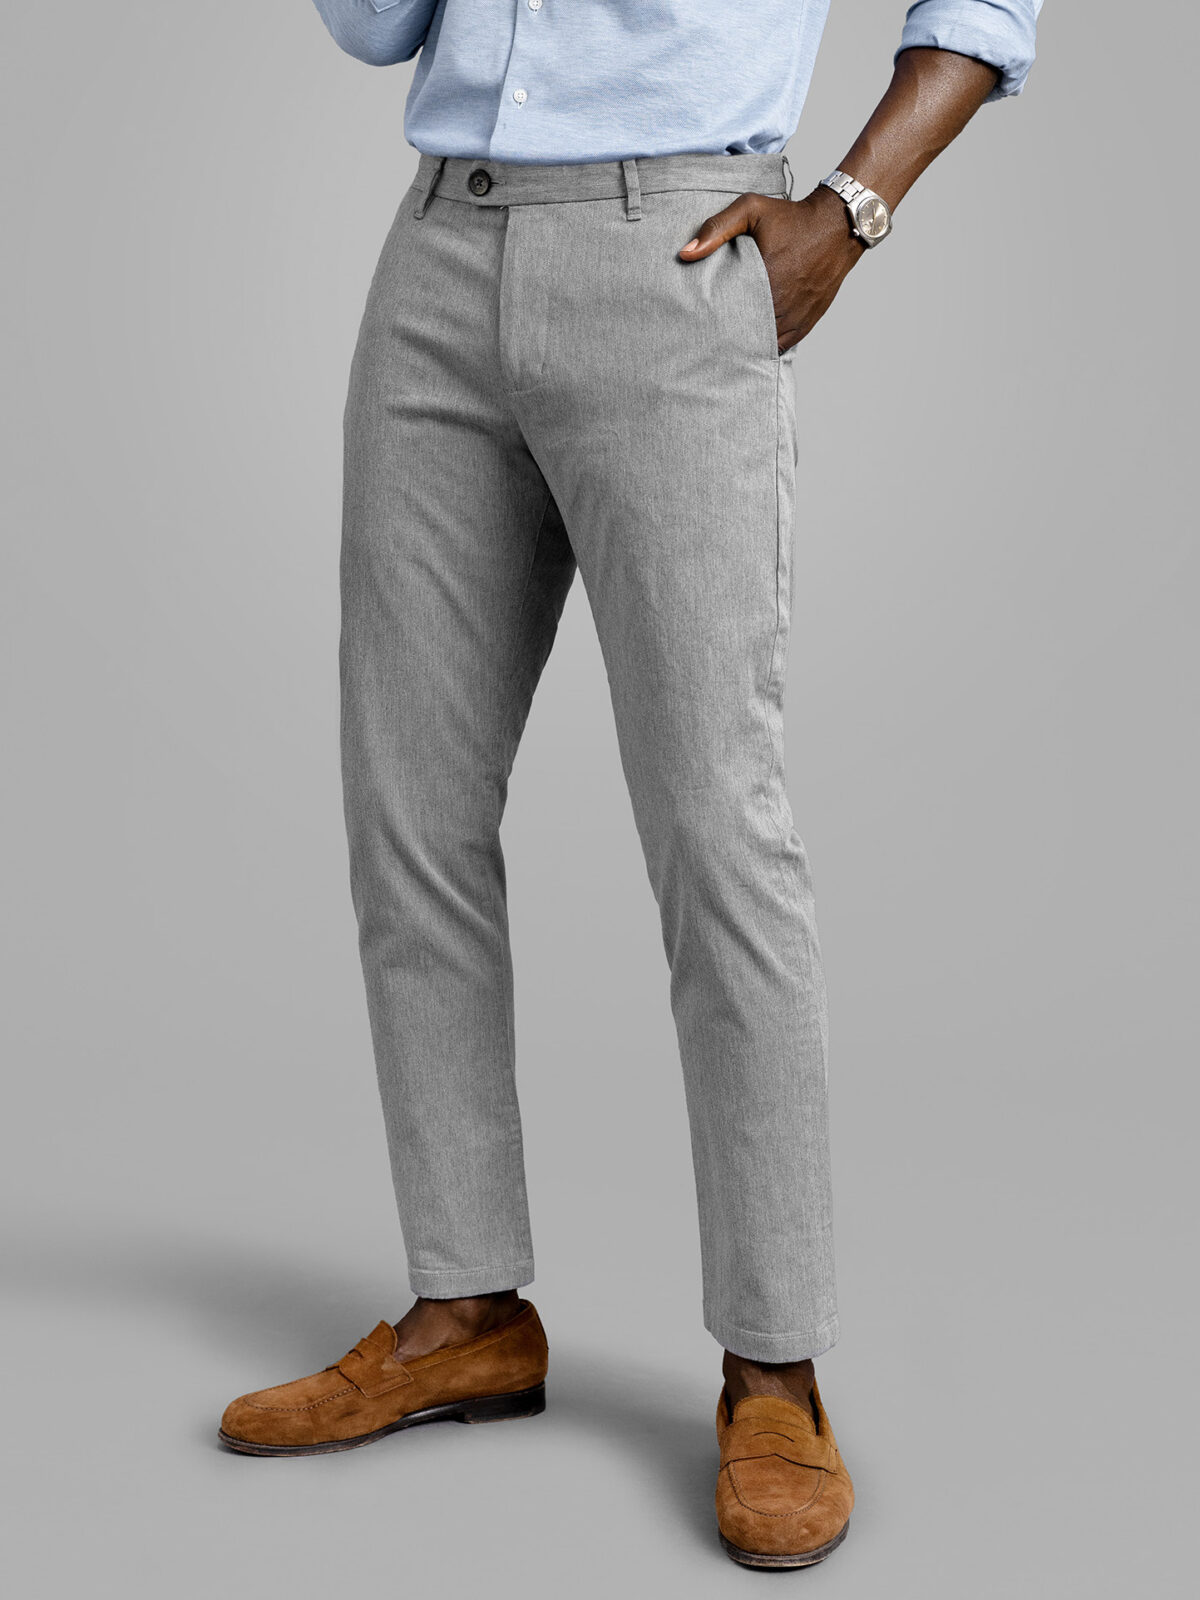 Grey Cotton Biella Trousers - Made in Italy